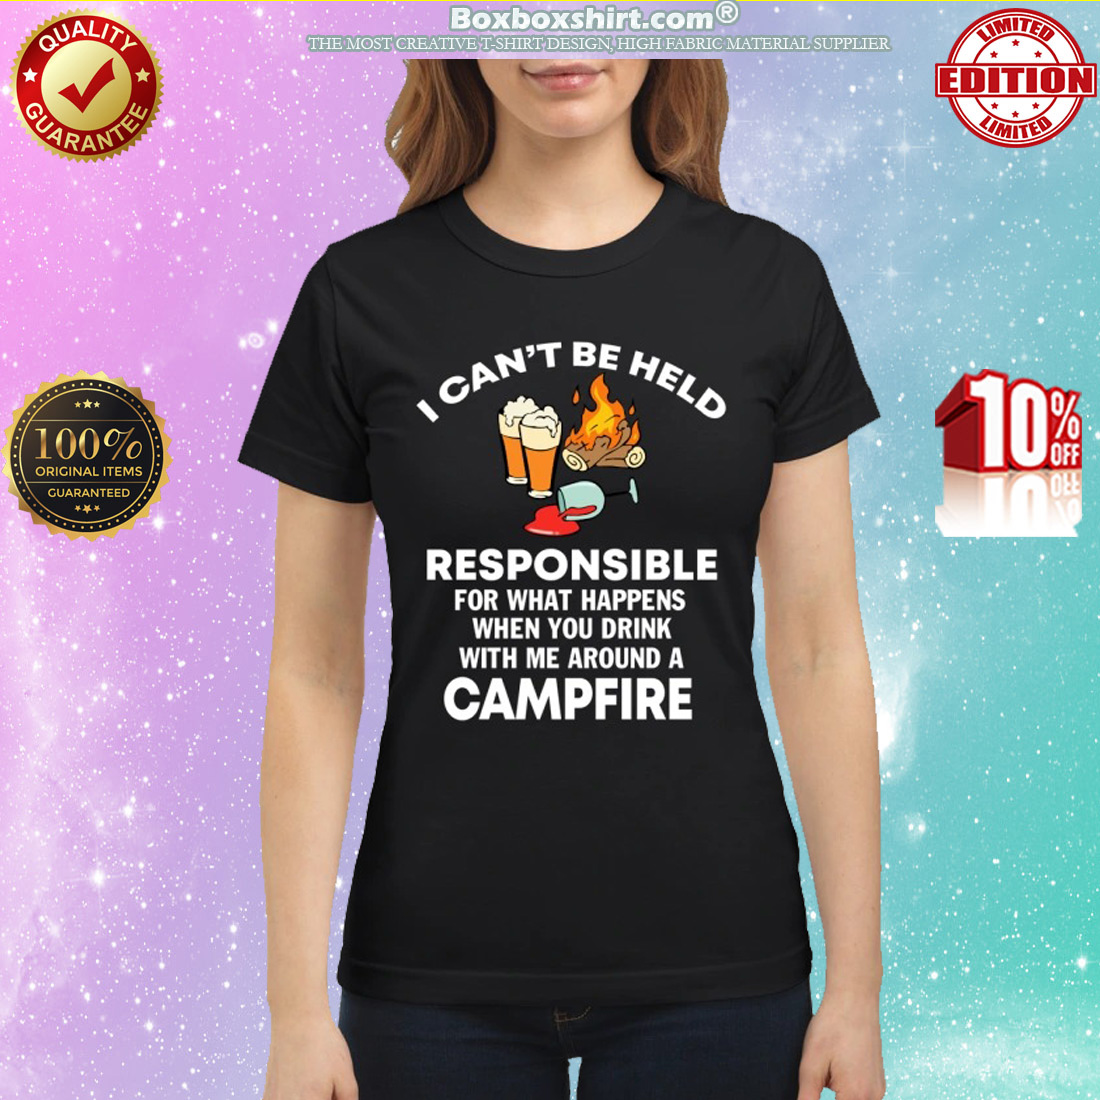 I can't be held responsible for what happen when you drink campfire classic shirt